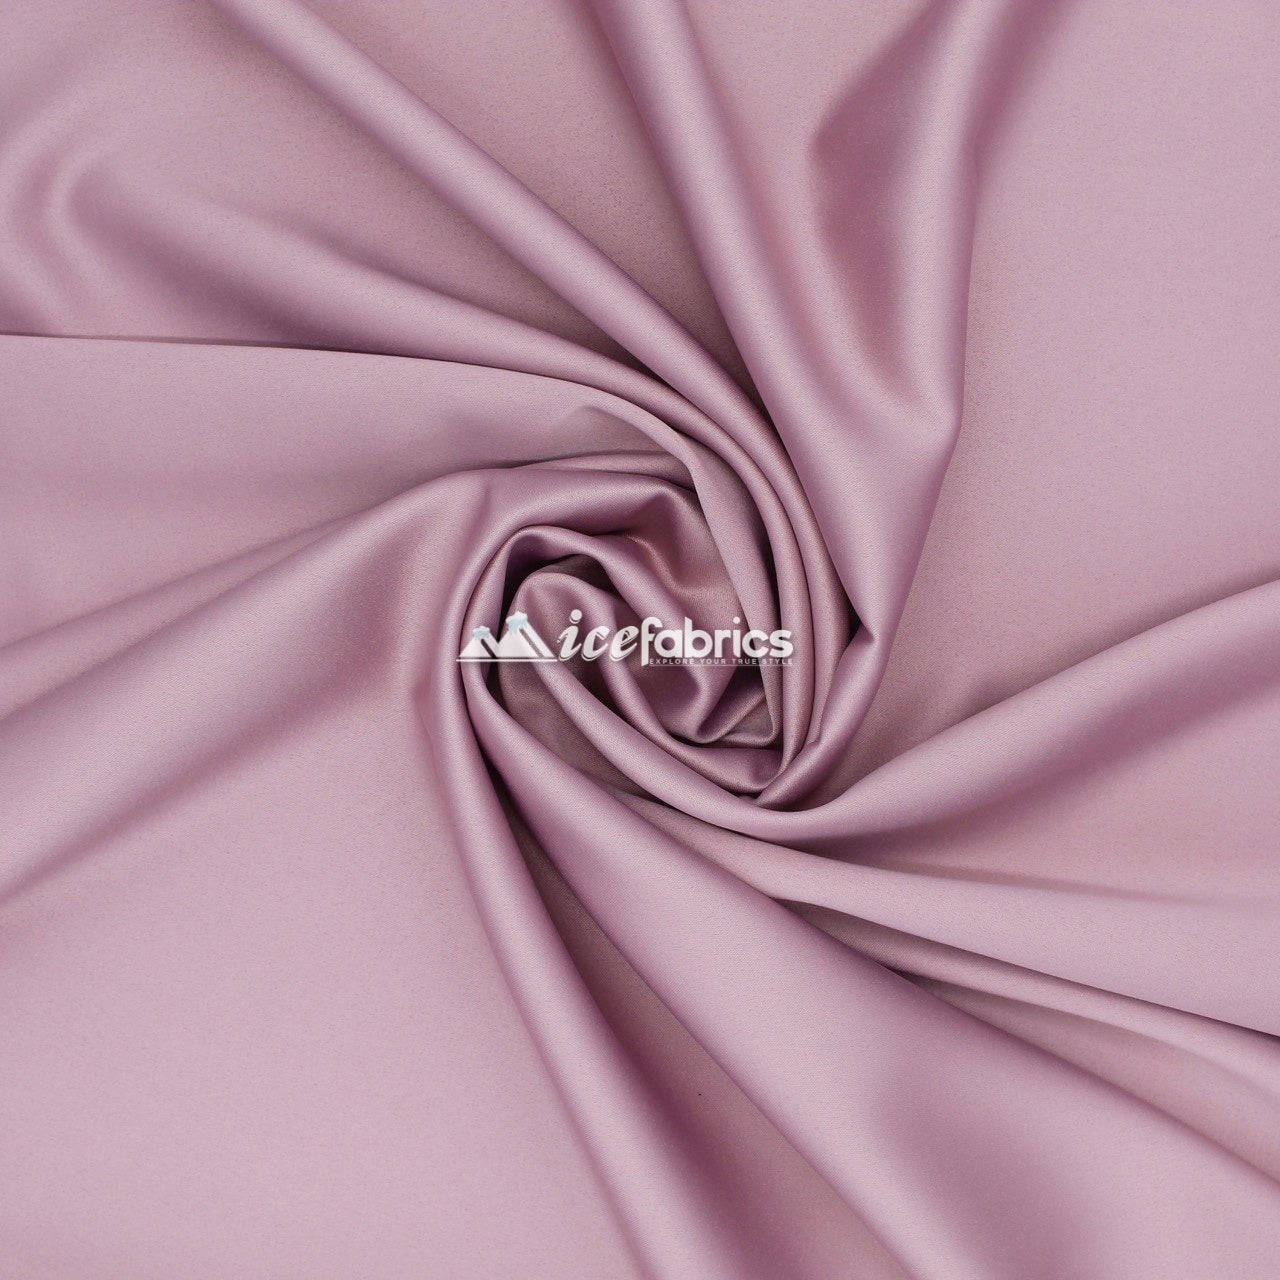 Armani Thick Solid Color Silky Stretch Satin Fabric Sold By The YardSatin FabricICE FABRICSICE FABRICSOff WhiteArmani Thick Solid Color Silky Stretch Satin Fabric Sold By The Yard ICE FABRICS Dusty Rose